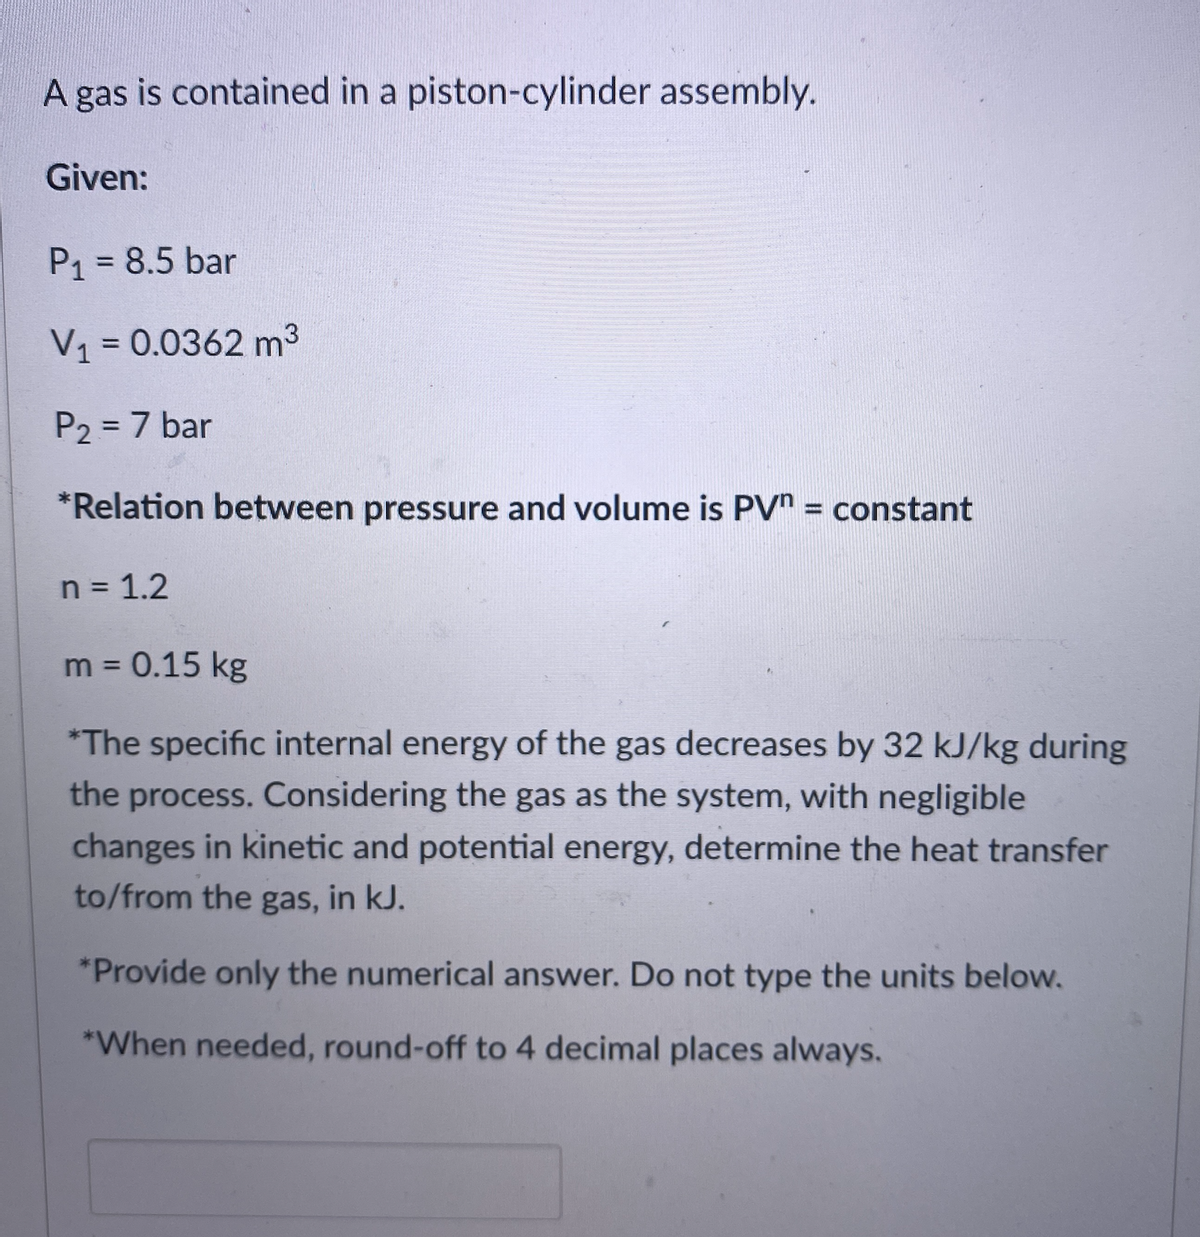 A gas is contained in a piston-cylinder assembly.
Given:
P1 = 8.5 bar
%3D
V = 0.0362 m3
P2 = 7 bar
%3D
*Relation between pressure and volume is PV" = constant
n = 1.2
m = 0.15 kg
%3D
*The specific internal energy of the gas decreases by 32 kJ/kg during
the process. Considering the gas as the system, with negligible
changes in kinetic and potential energy, determine the heat transfer
to/from the gas, in kJ.
*Provide only the numerical answer. Do not type the units below.
*When needed, round-off to 4 decimal places always.
